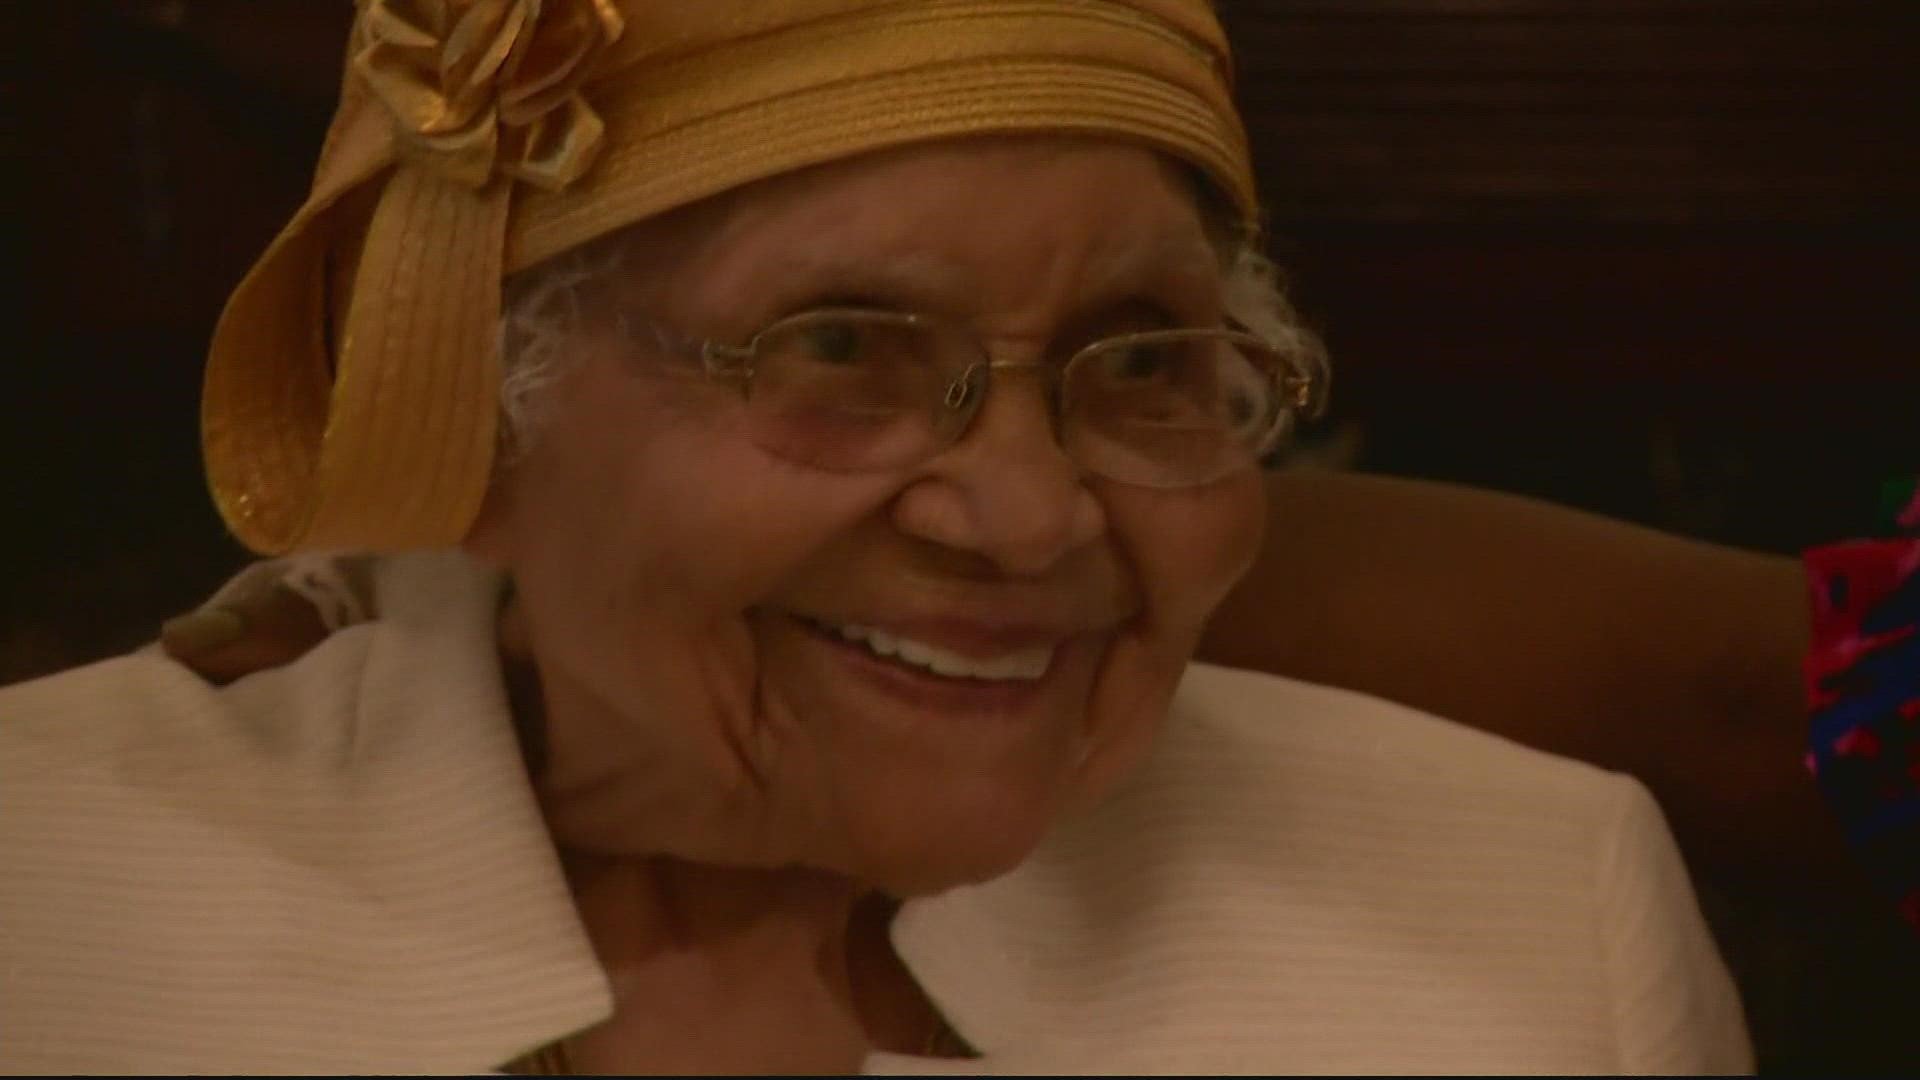 Vanilla Beane -- a woman affectionately known as DC's hat lady -- has died. Rest in heaven, Ms. Beane. 
She was 103 years old.